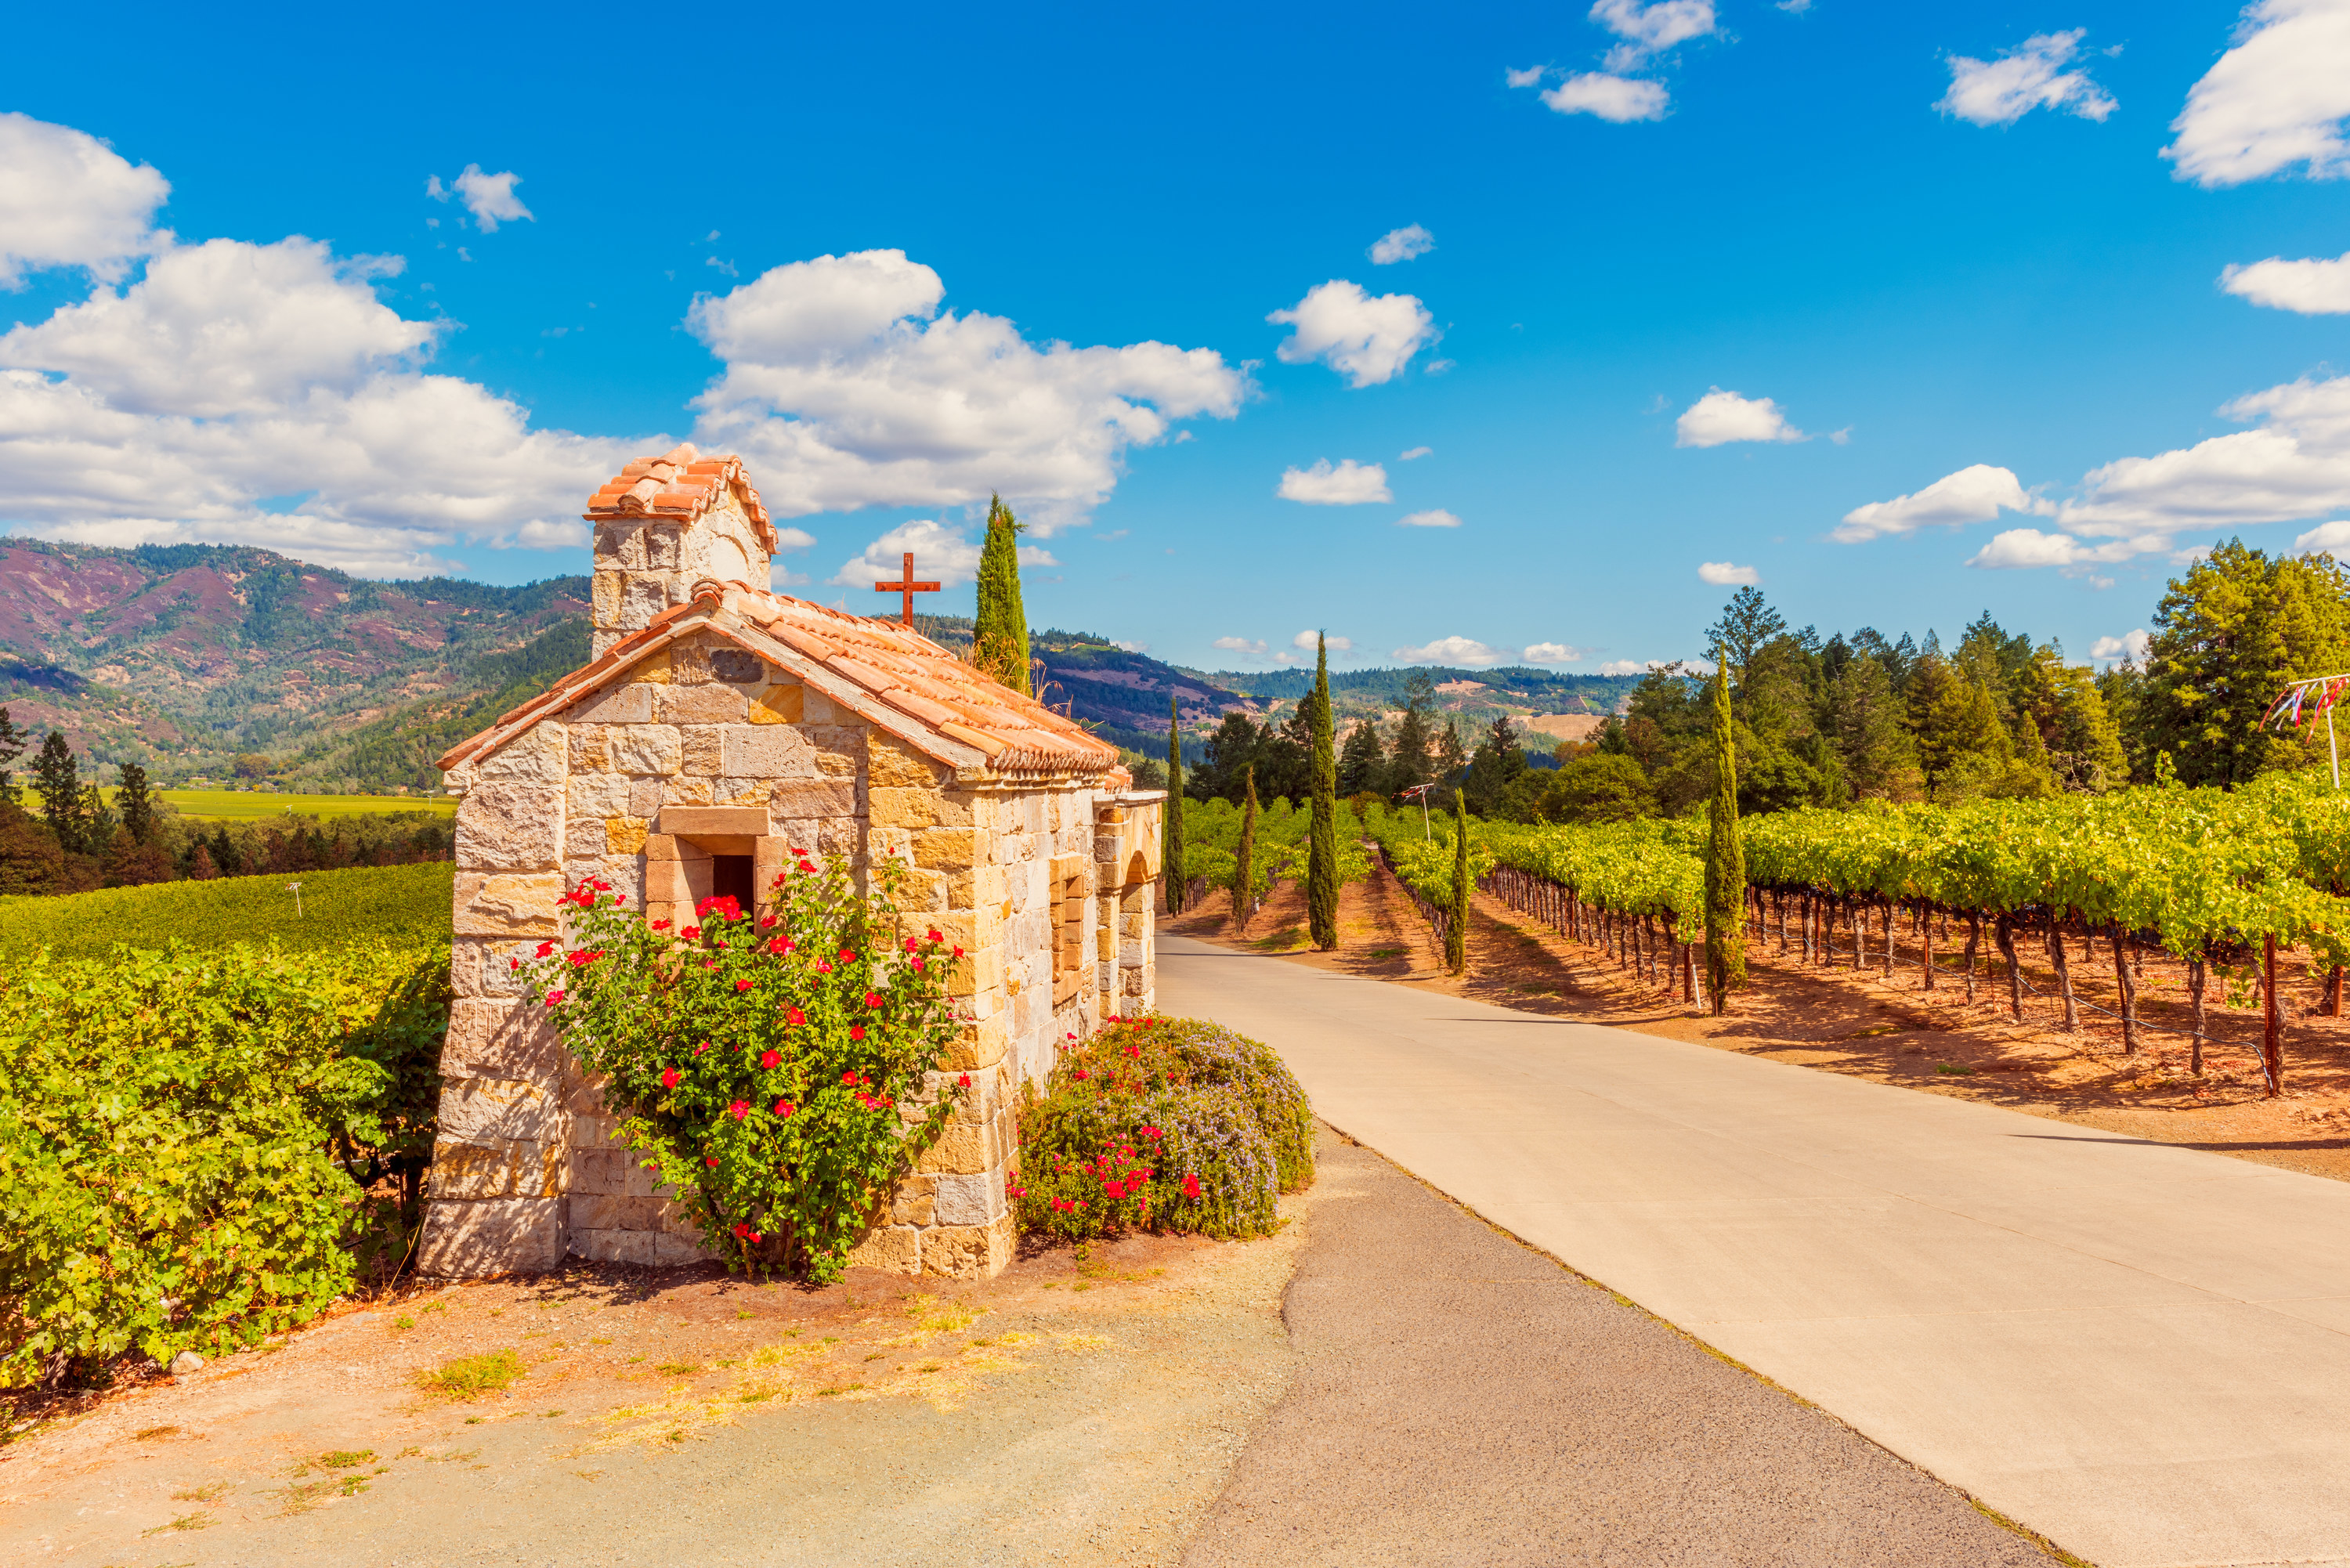 Stone building with cross in front of winery with mountains behind.